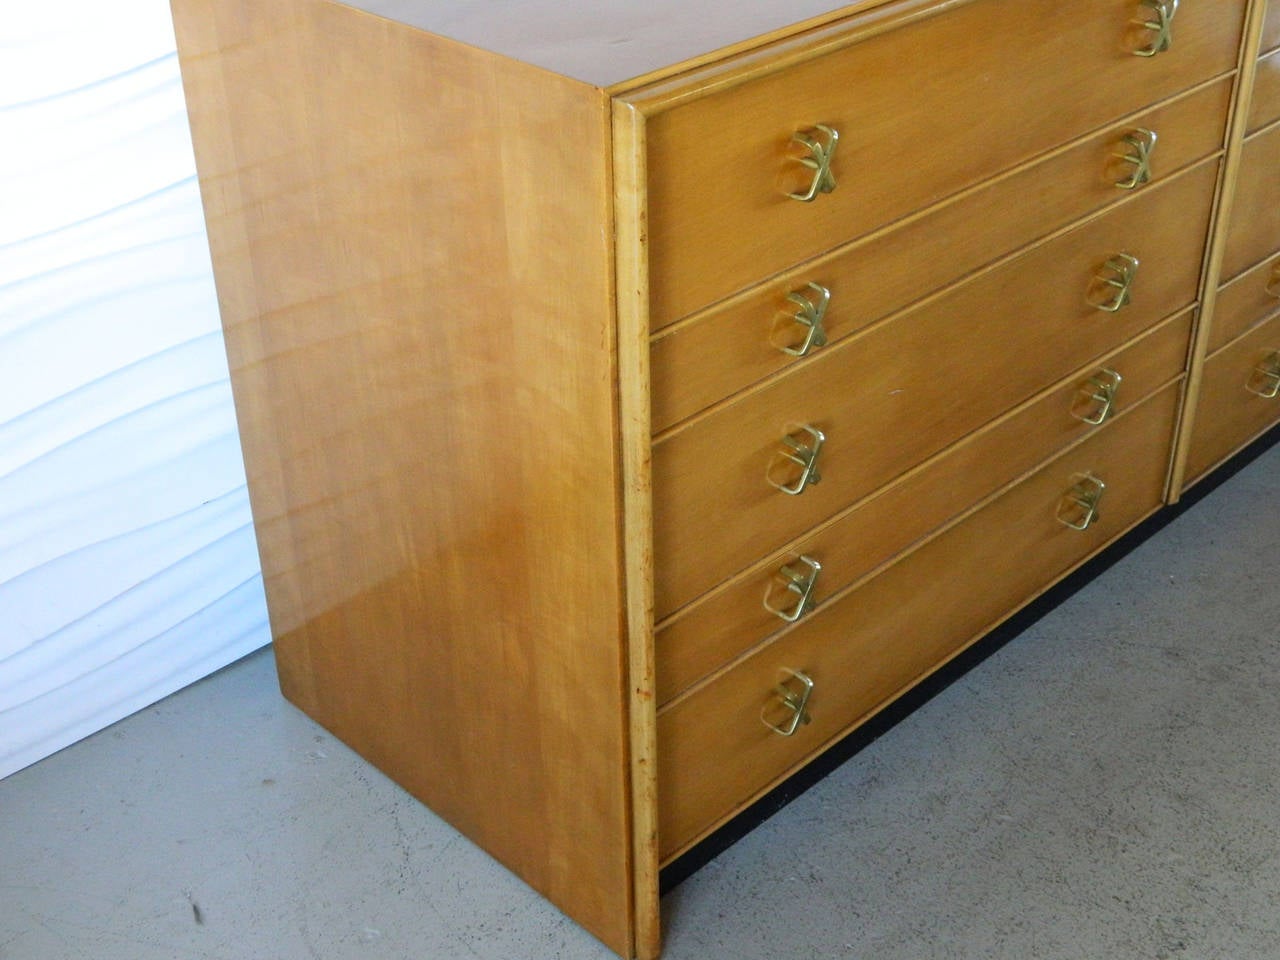 This ten-drawer dresser by American designer Paul Frankl for John Stuart was manufactured in the 1950s. It is made of maple and has Frankl's trademark X pulls.